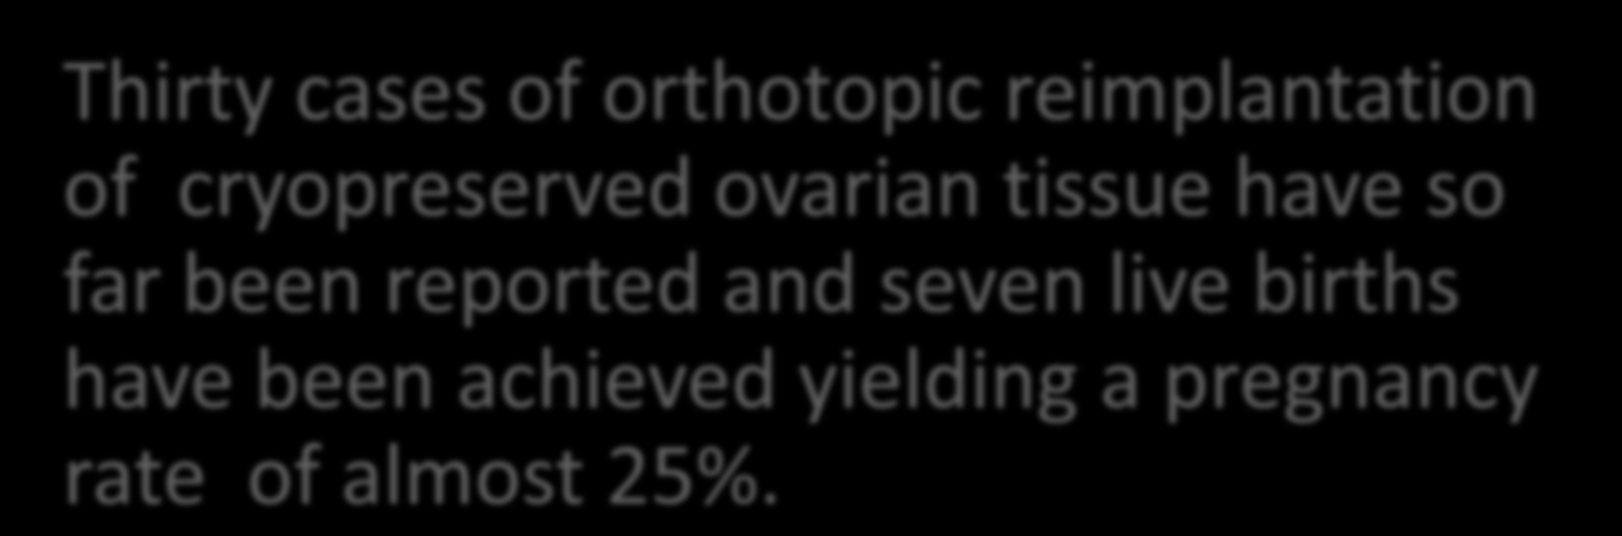 Thirty cases of orthotopic reimplantation of cryopreserved ovarian tissue have so far been reported and seven live